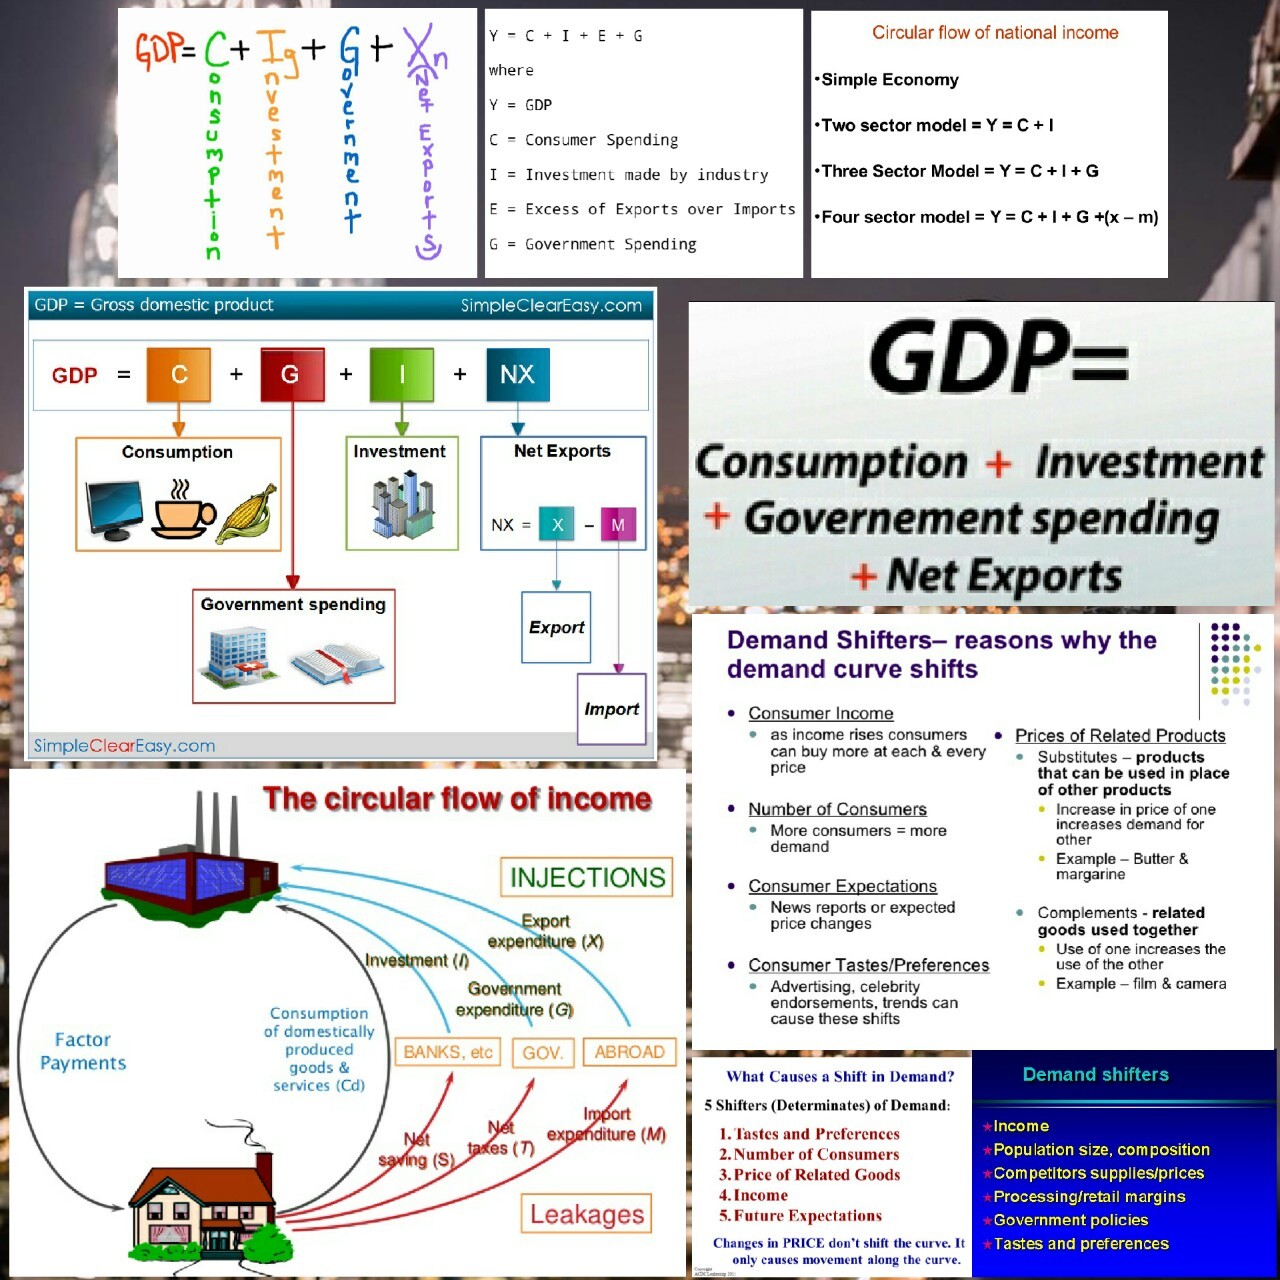 he-who-reads-between-the-lines:Bertnascious presents Gross Domestic Product or GDP